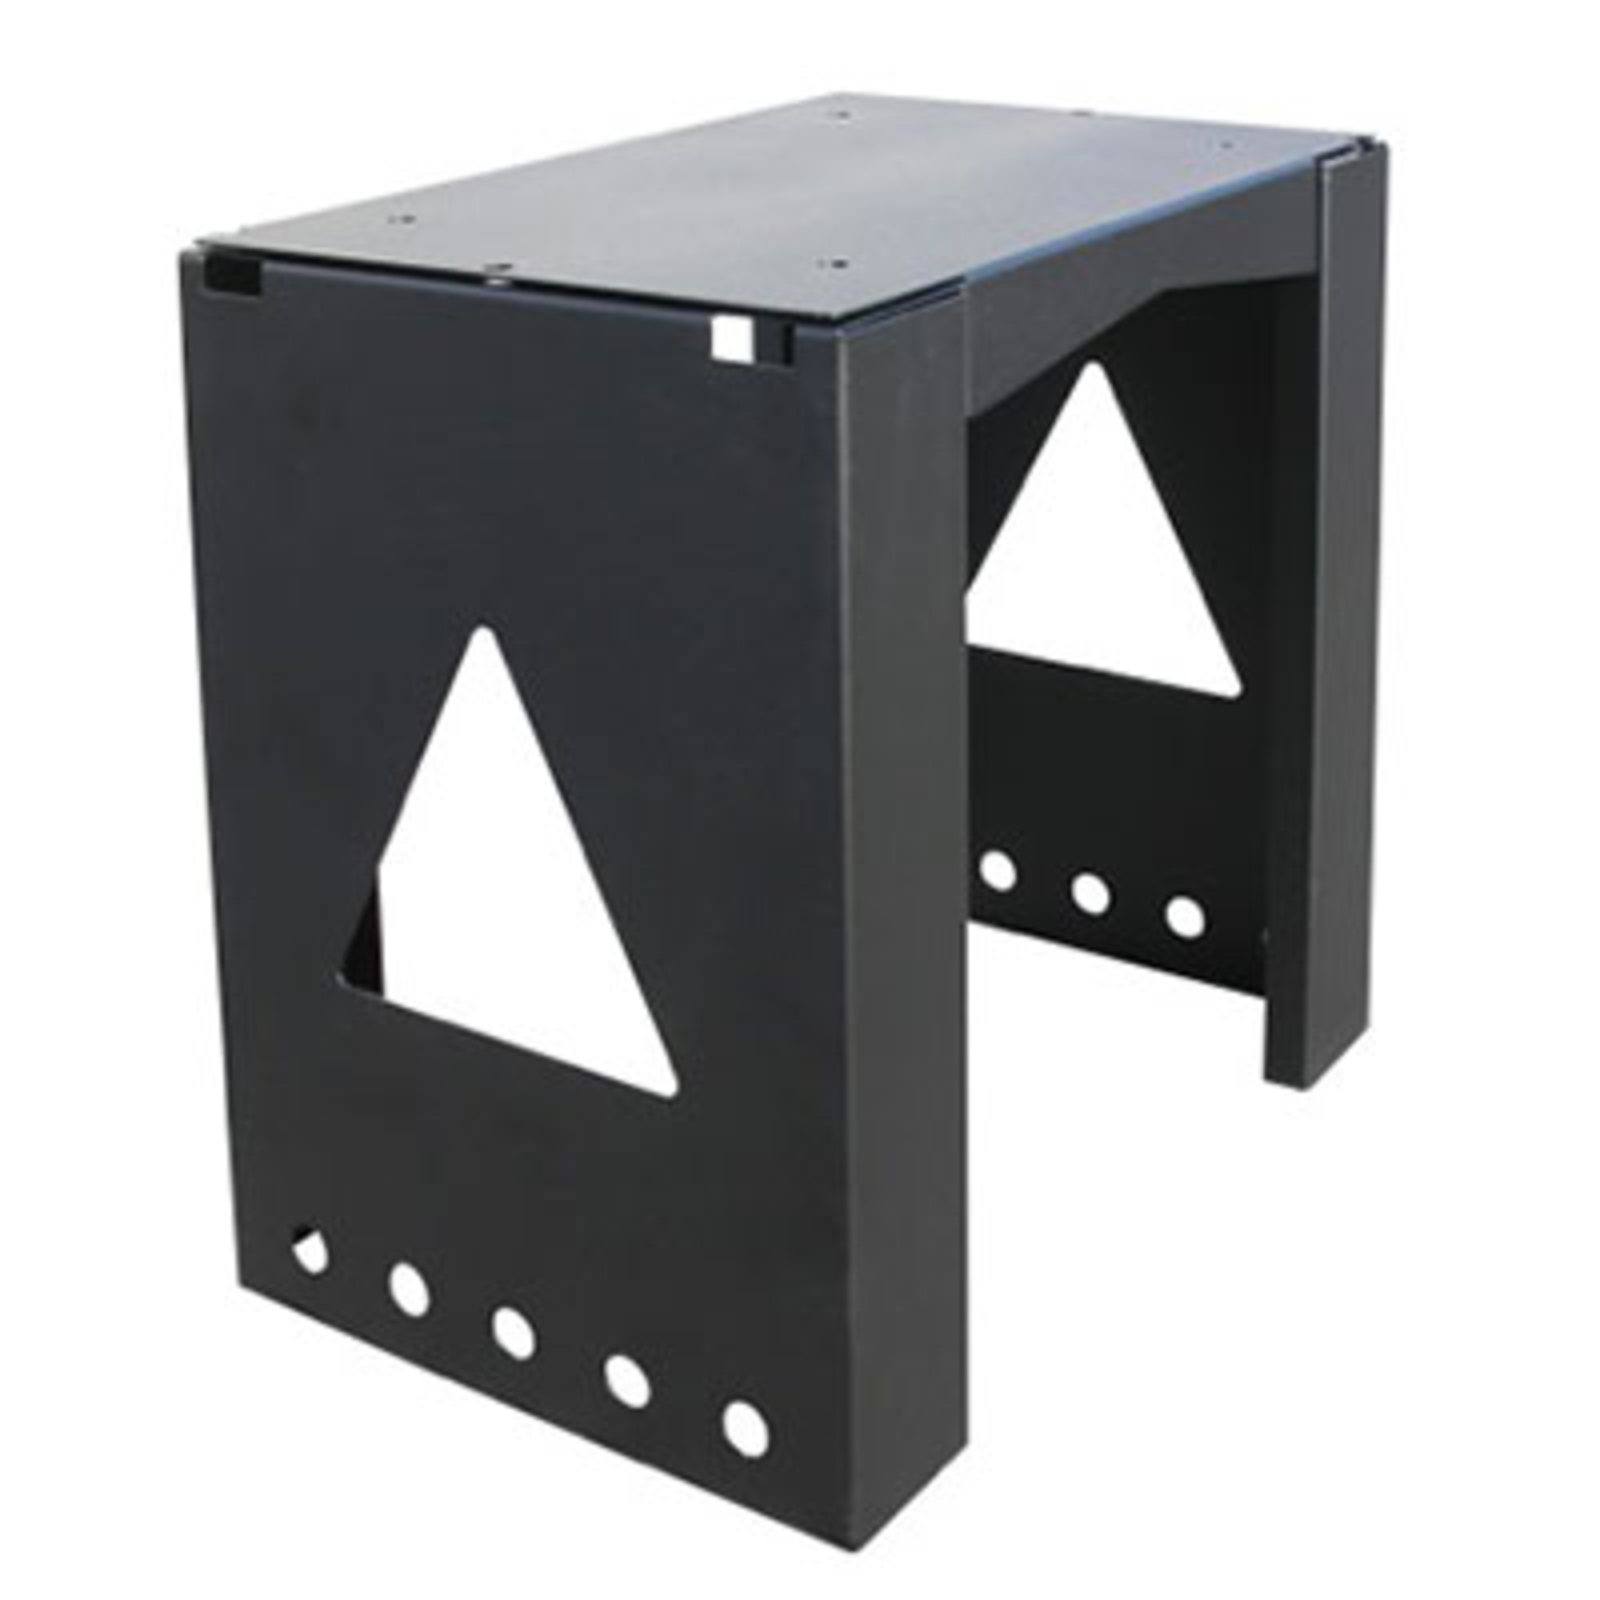 Versatile Stand 8002 letterbox stand, black